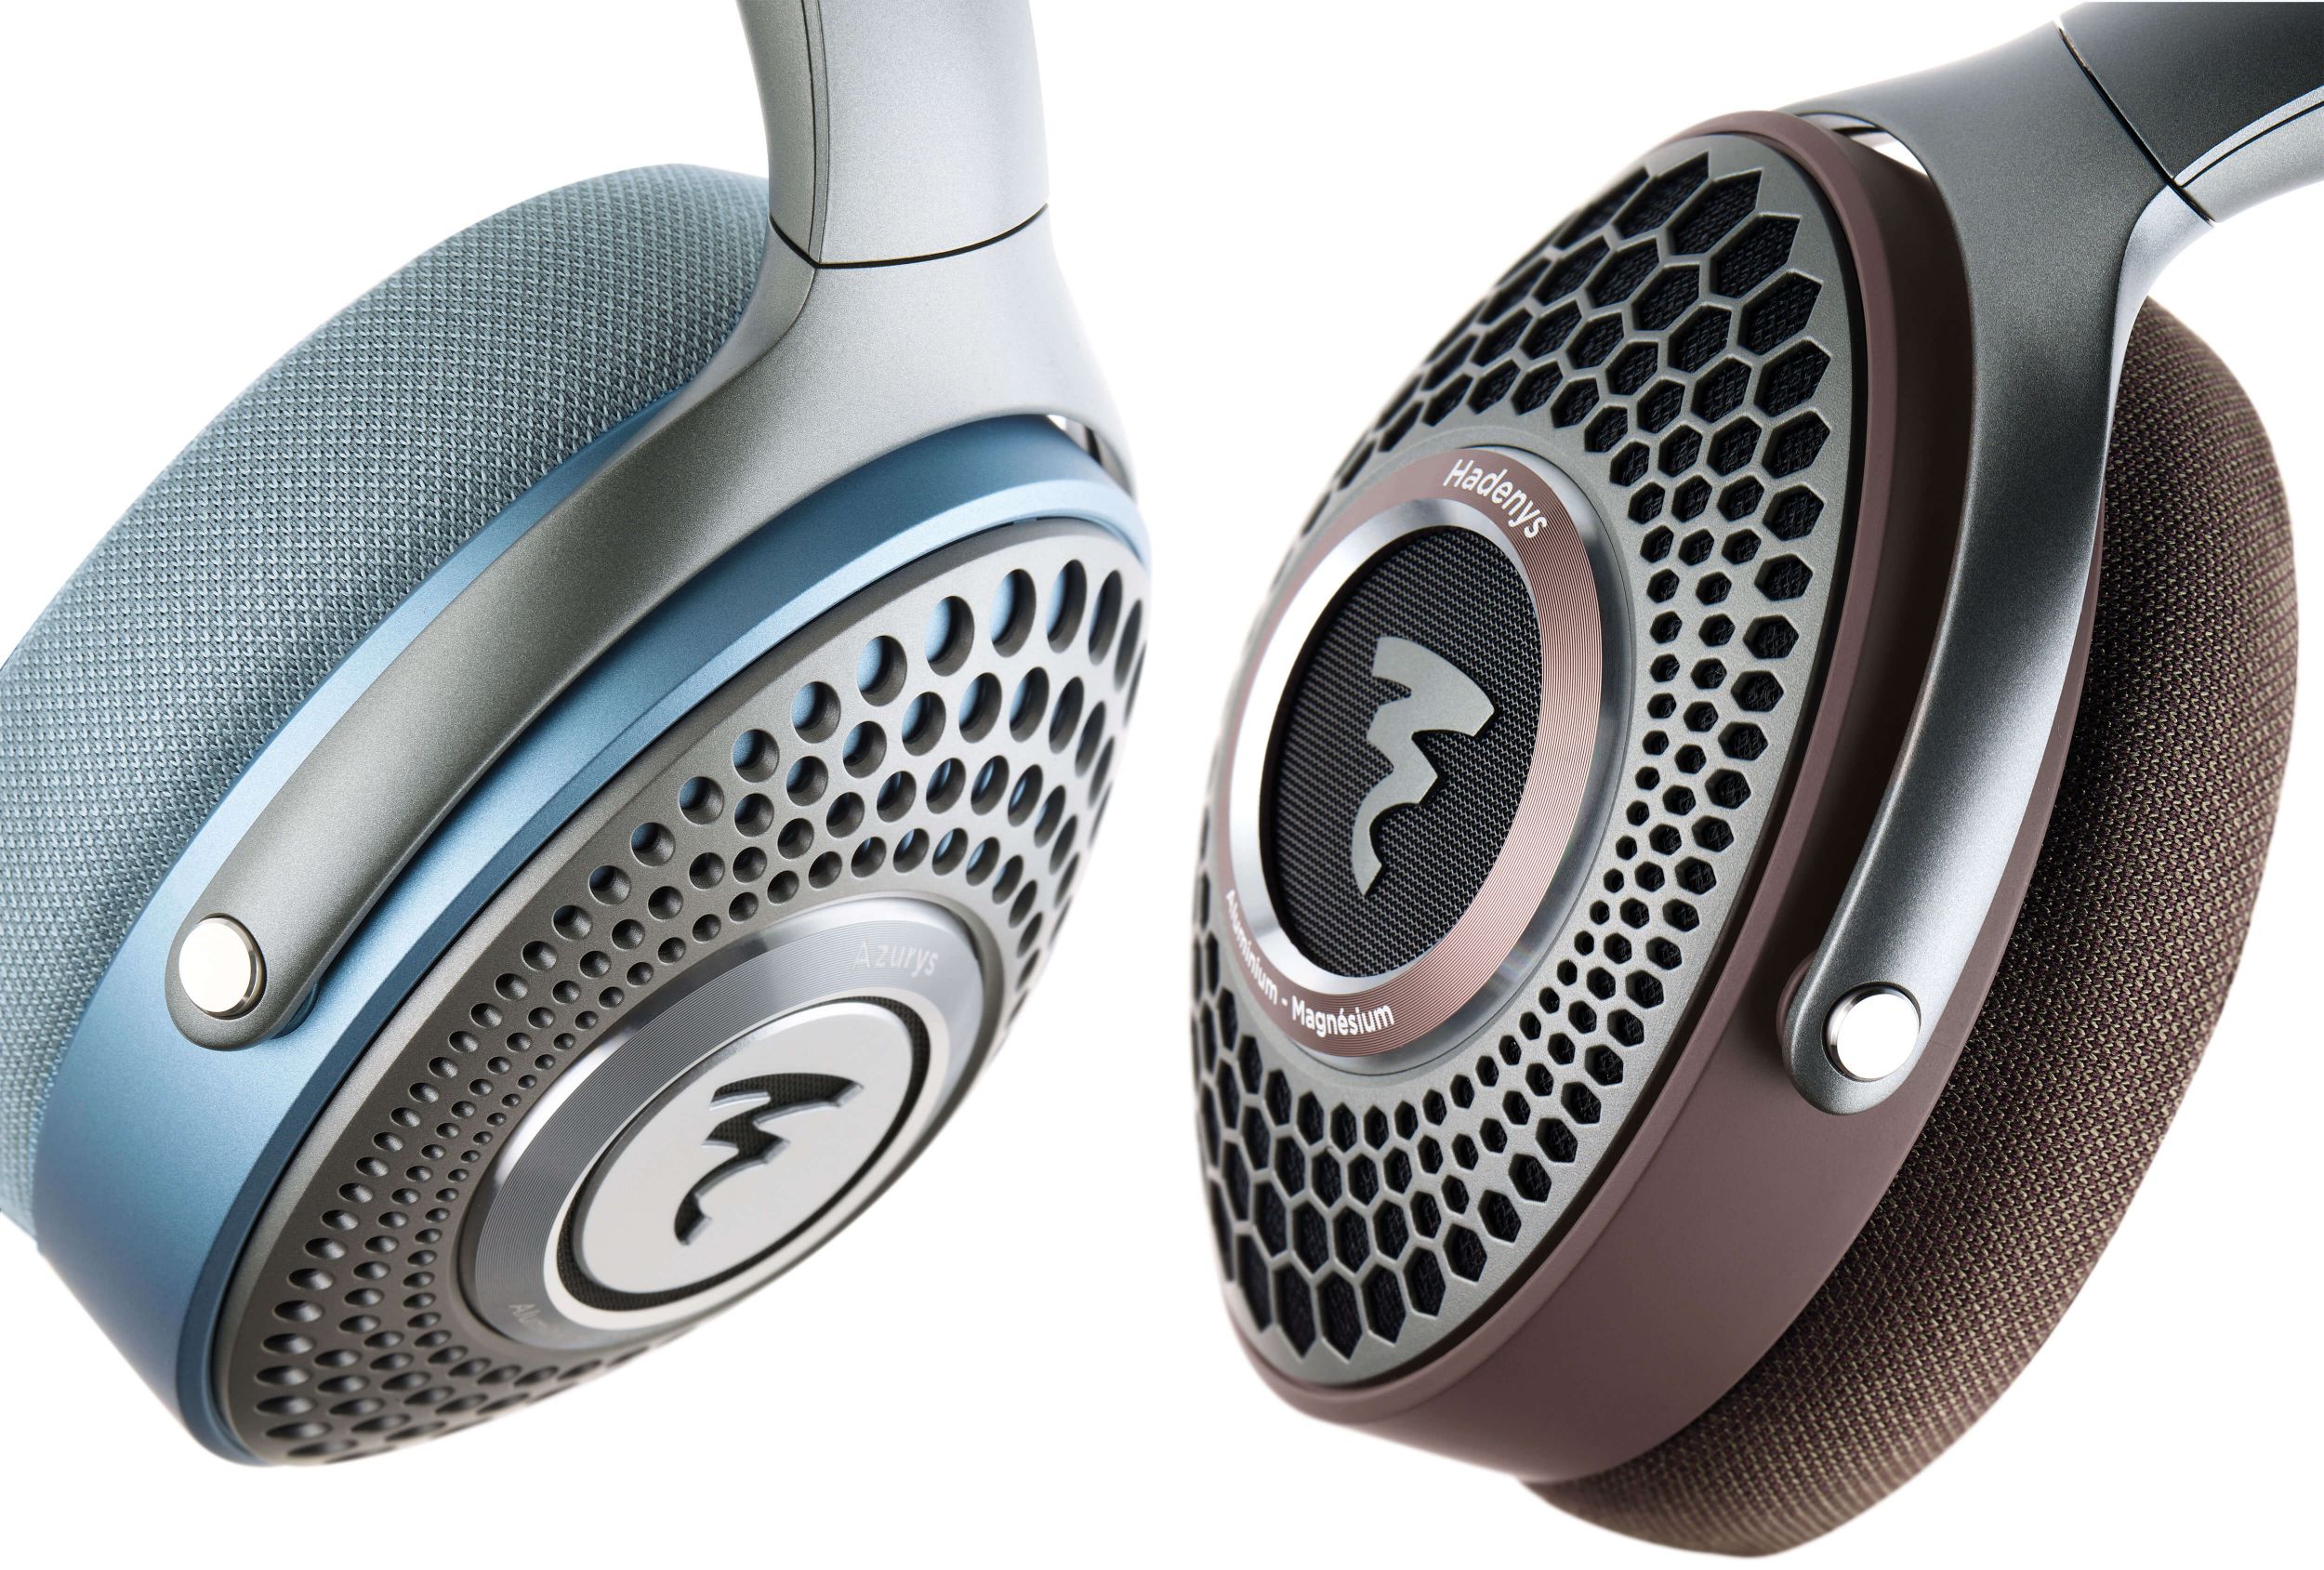 Focal Azurys and Hadenys wired headphones.